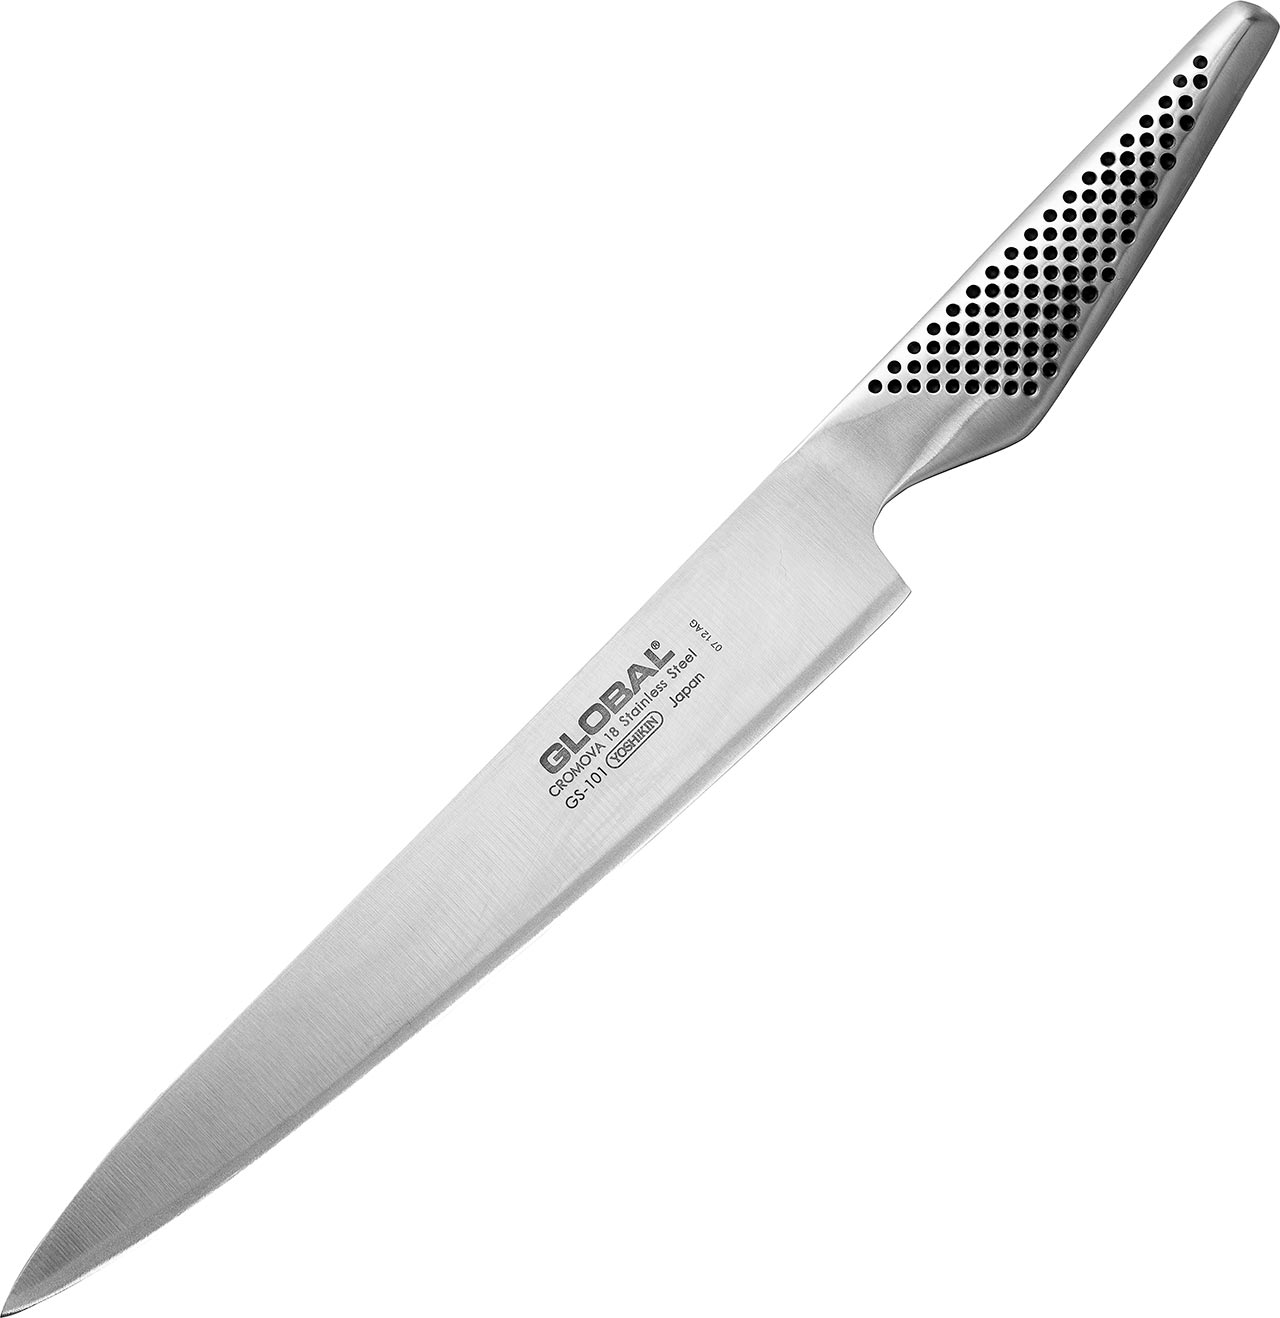 GS-101 Carving Knife 20cm